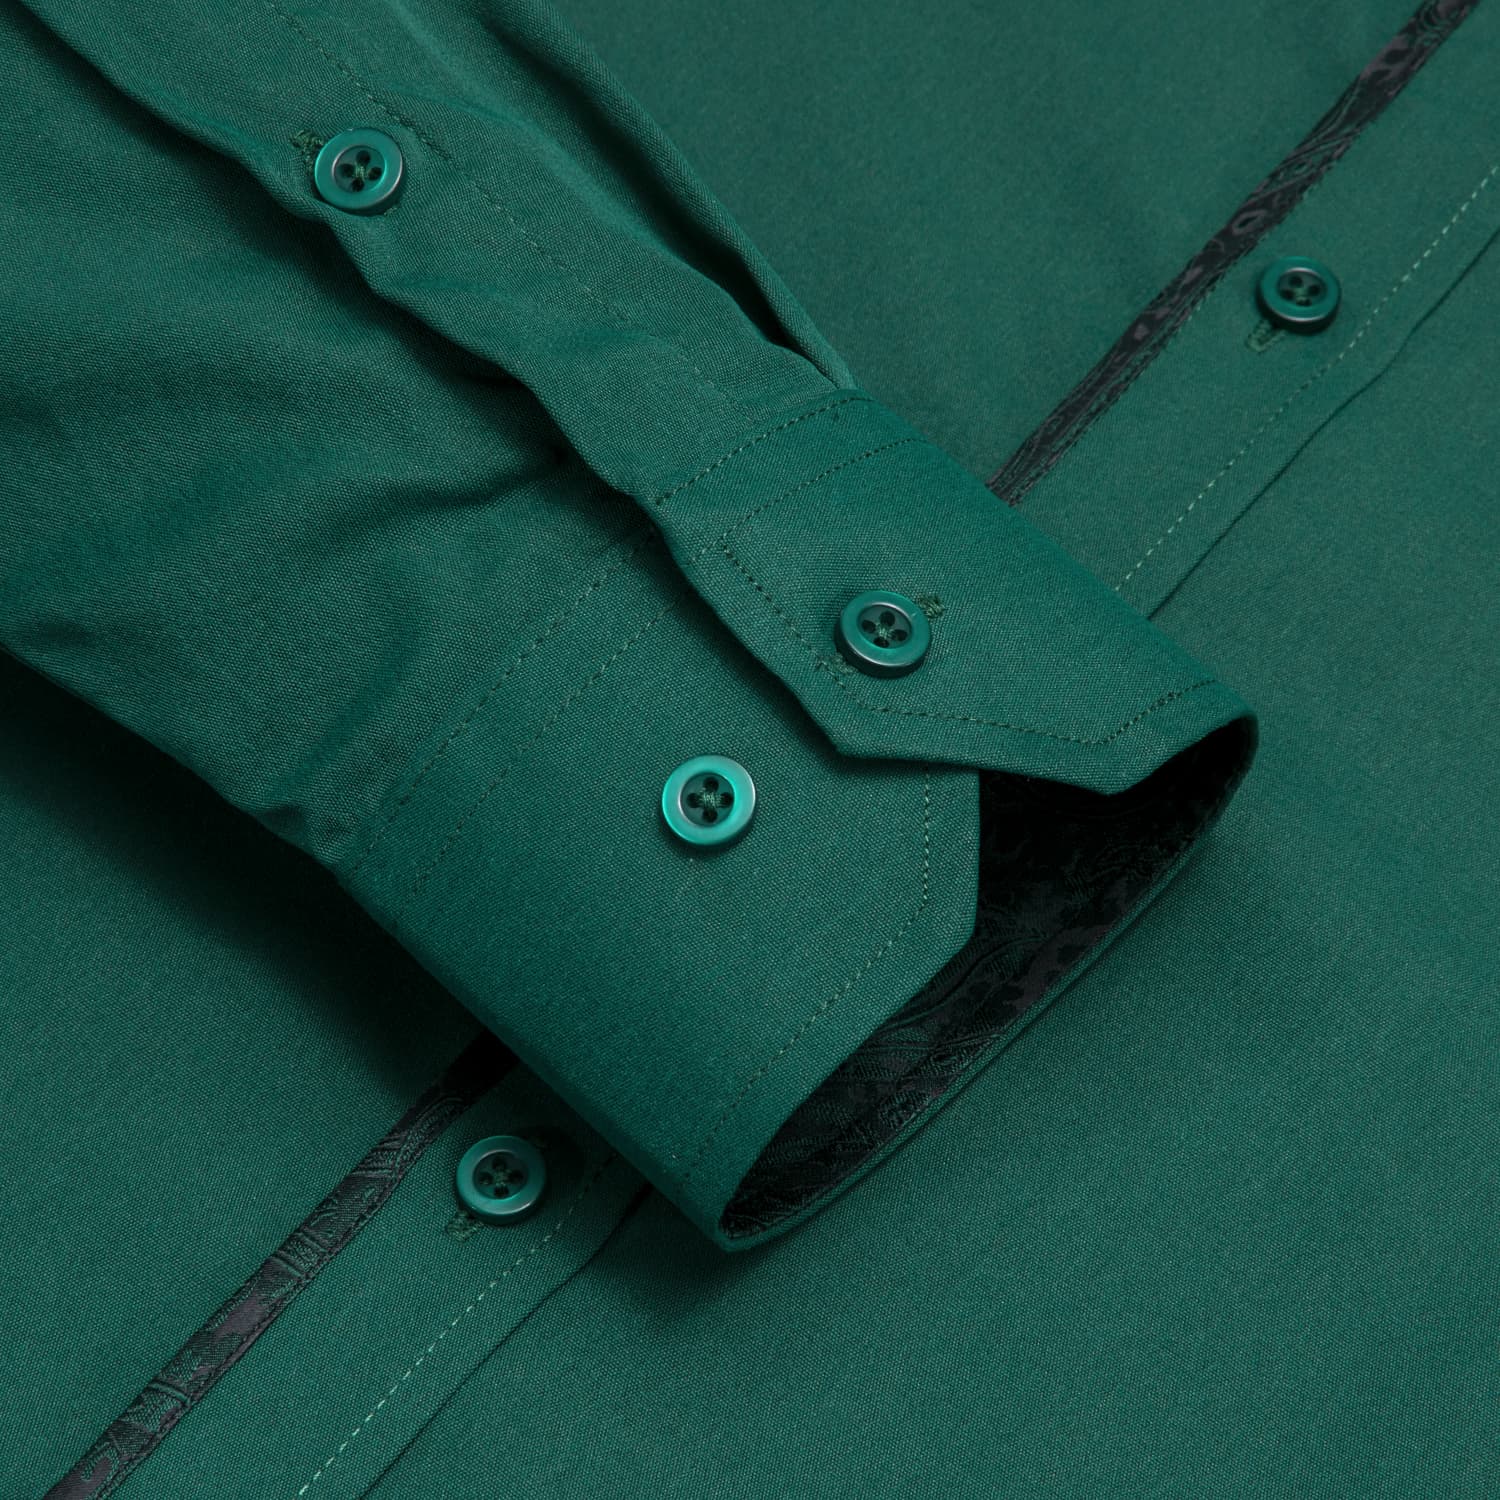 Hi-Tie Button Down Shirt Solid SeaGreen Shirt with Jacquard Collar